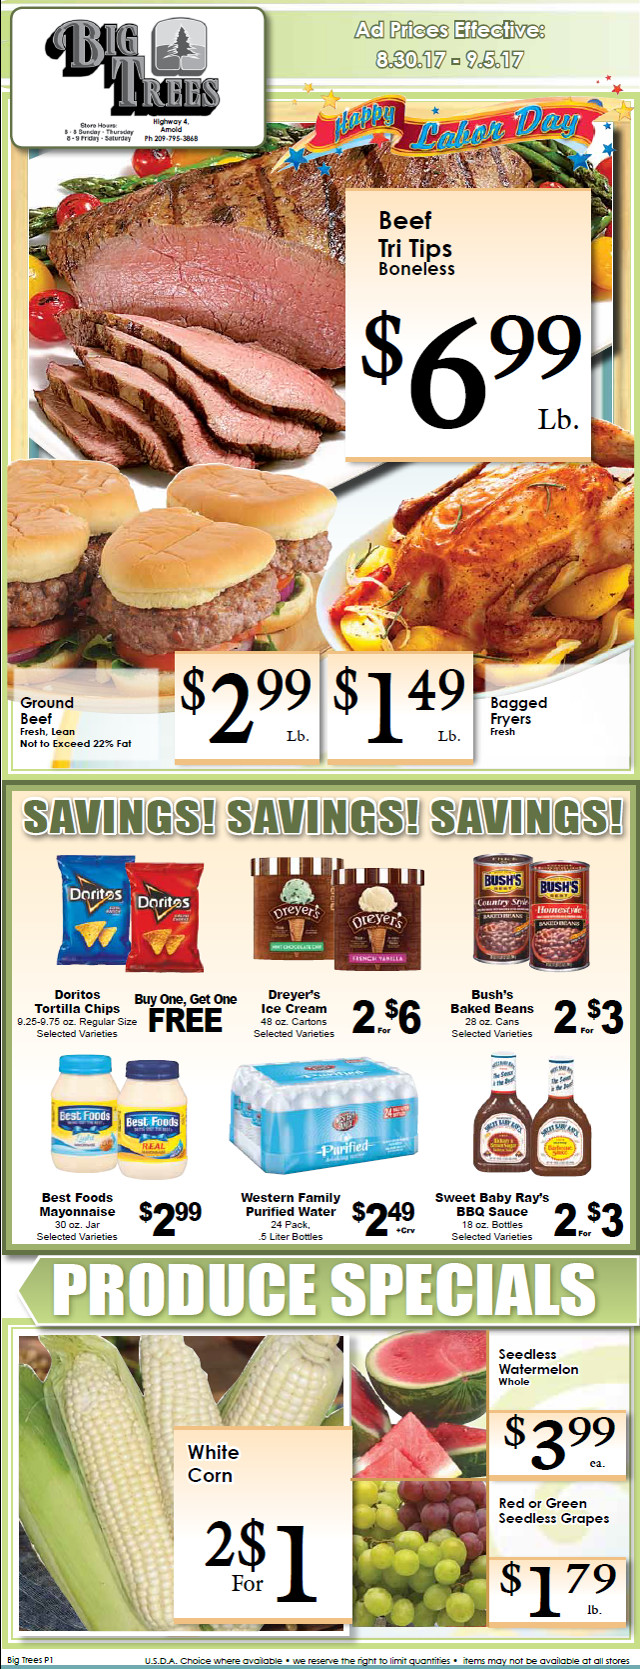 Big Trees Market Weekly Ad & Specials Through September 5th